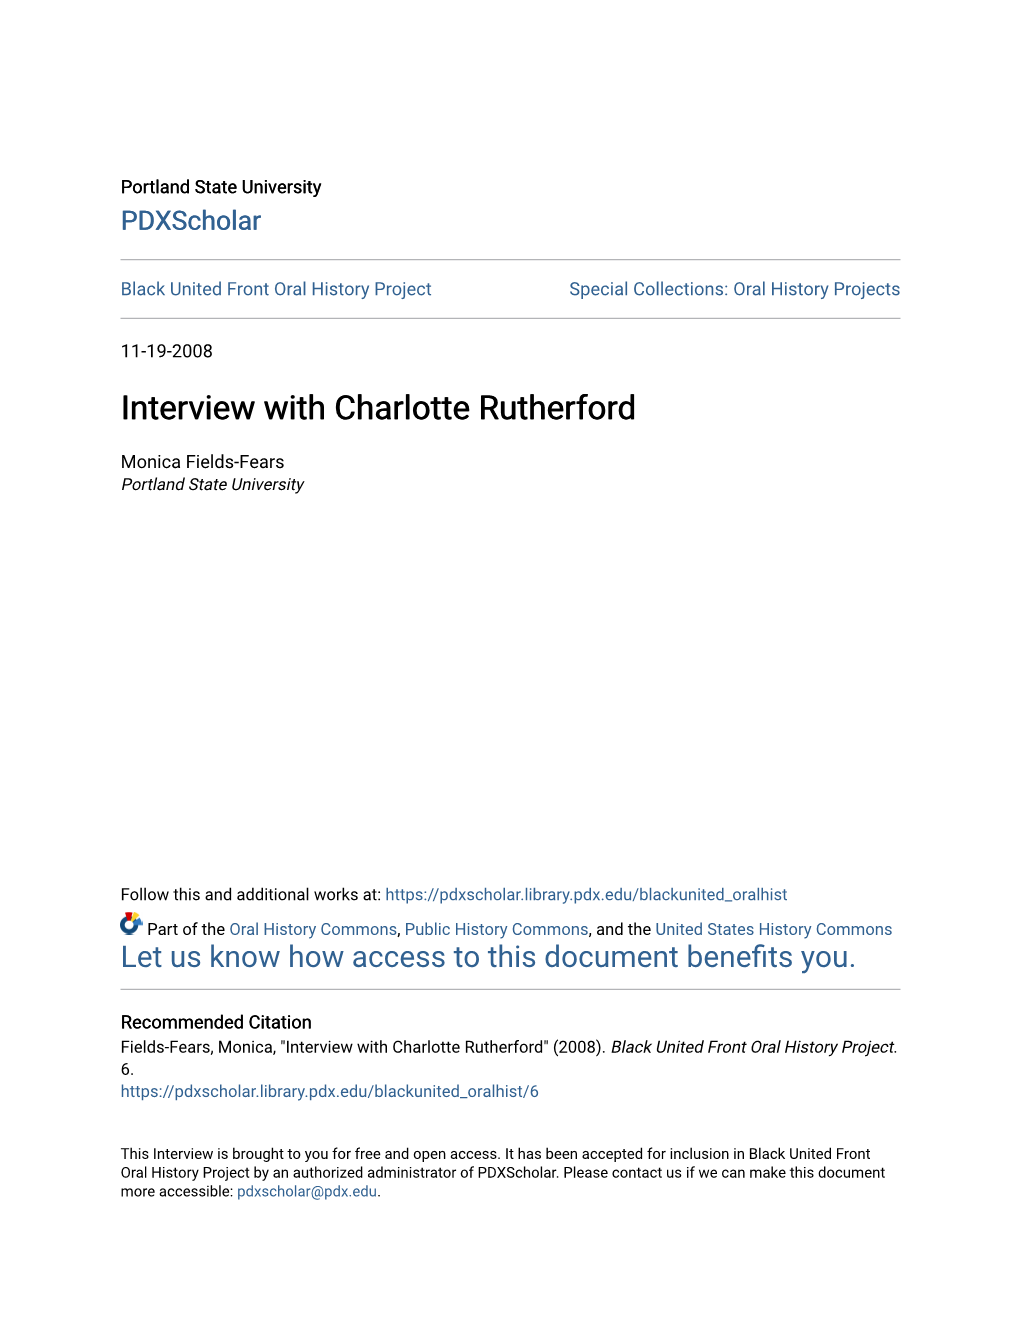 Interview with Charlotte Rutherford